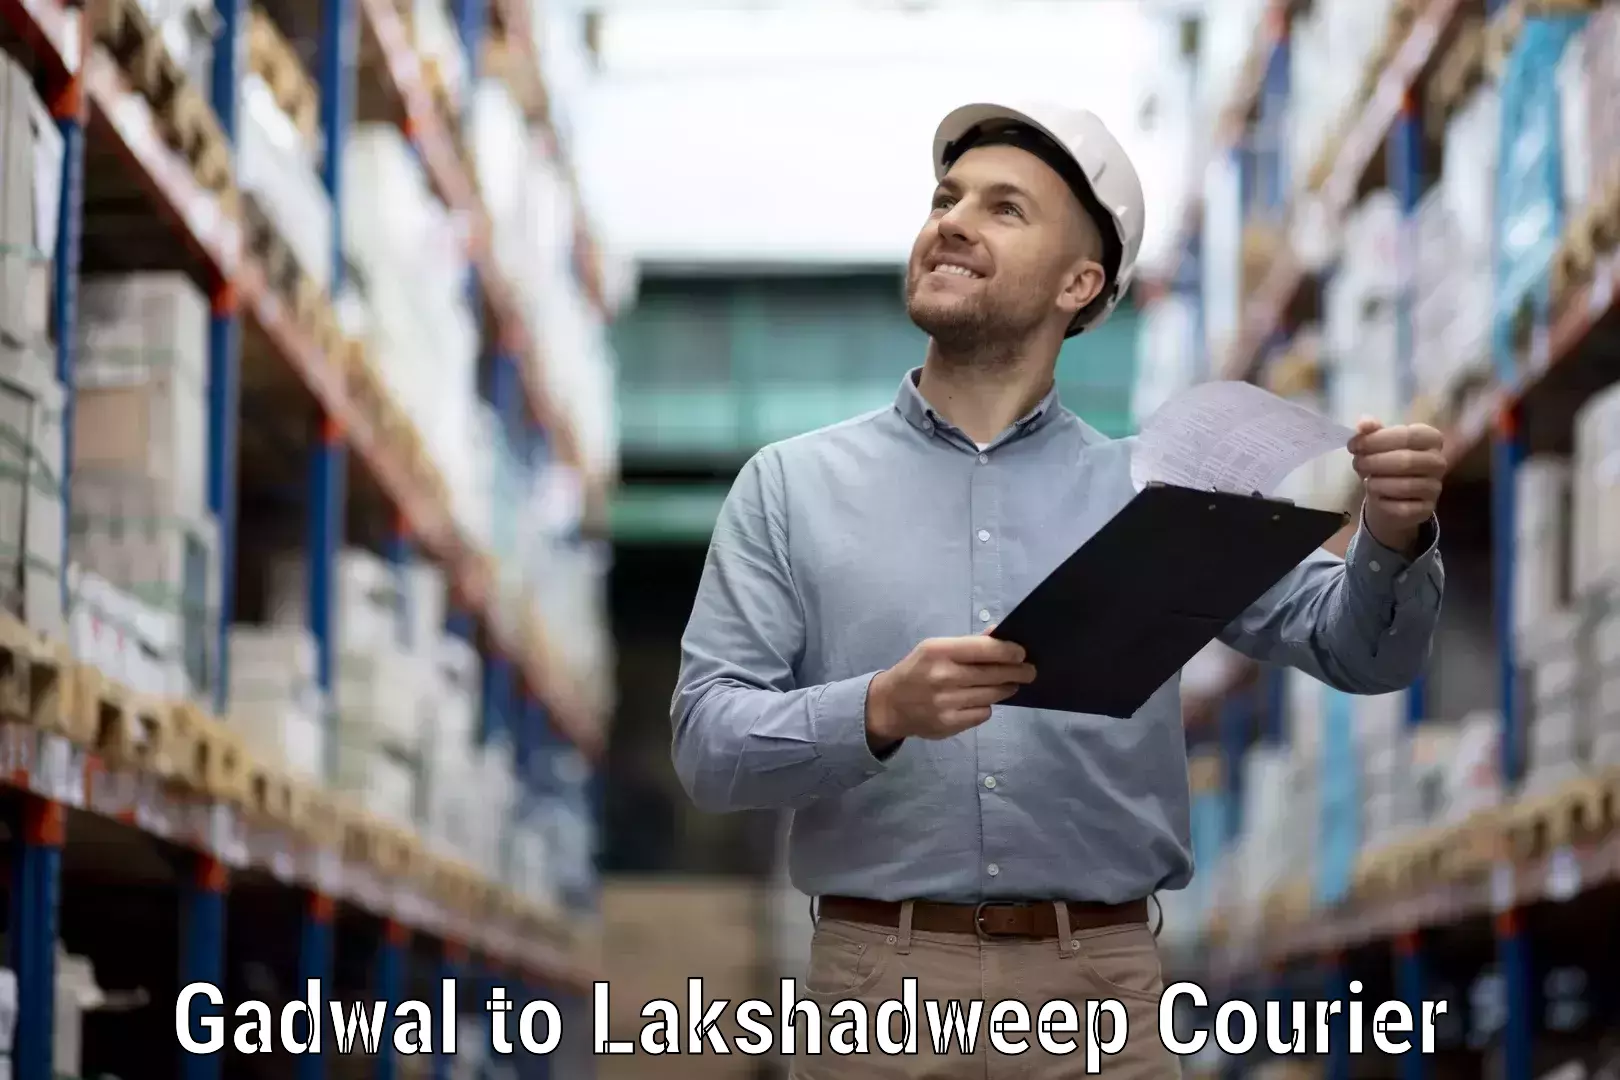 24-hour courier service Gadwal to Lakshadweep